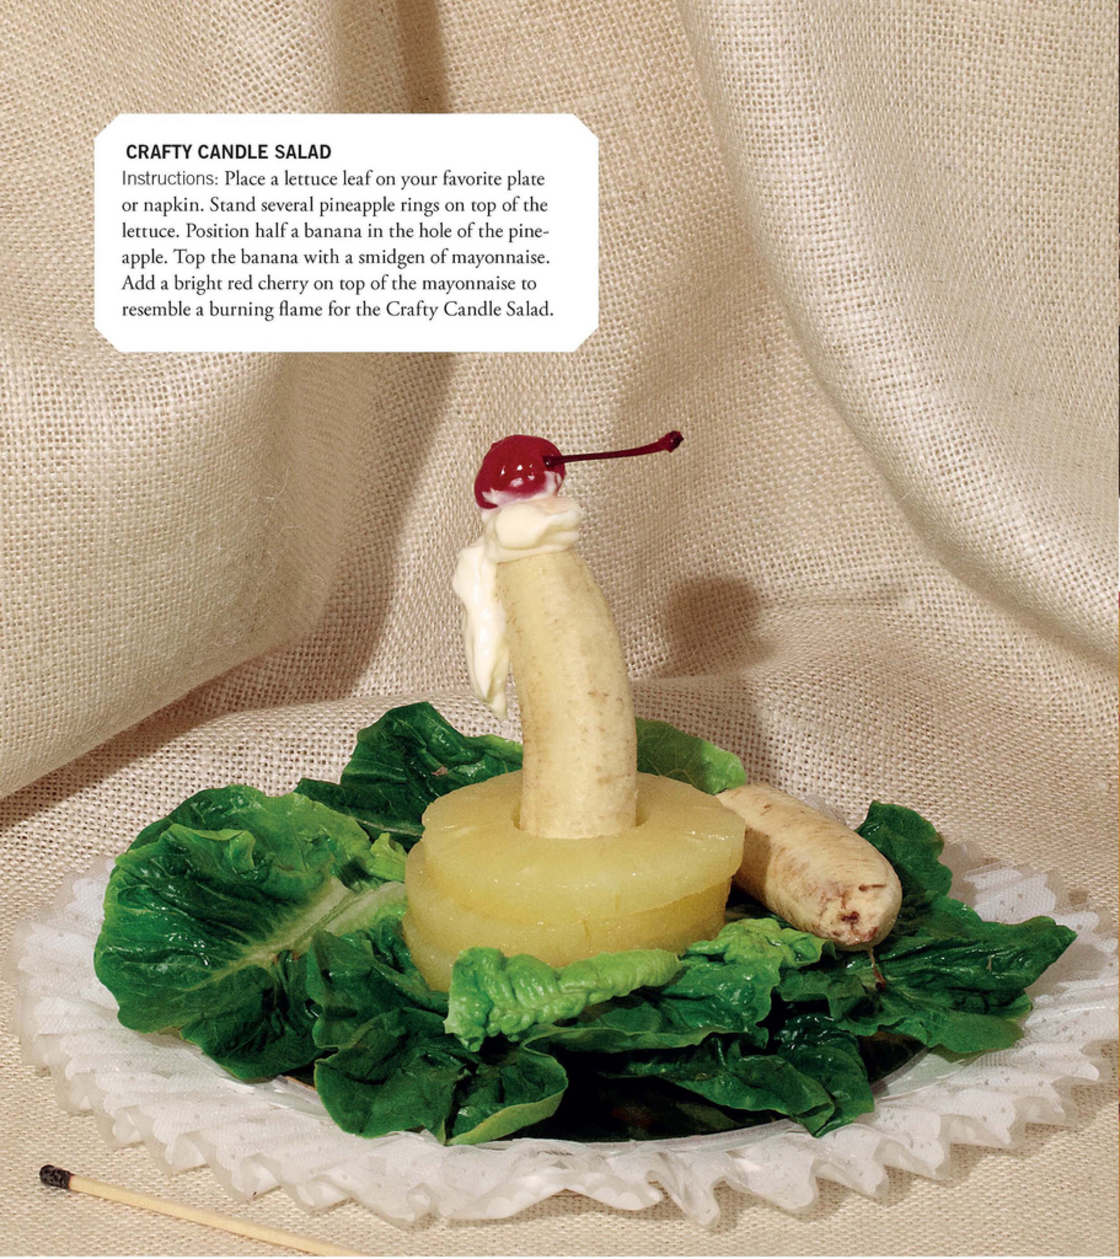 random crafty candle salad - Crafty Candle Salad Instructions Place a lettuce leaf on your favorite plate or napkin. Stand several pineapple rings on top of the lettuce. Position half a banana in the hole of the pine apple. Top the banana with a smidgen o